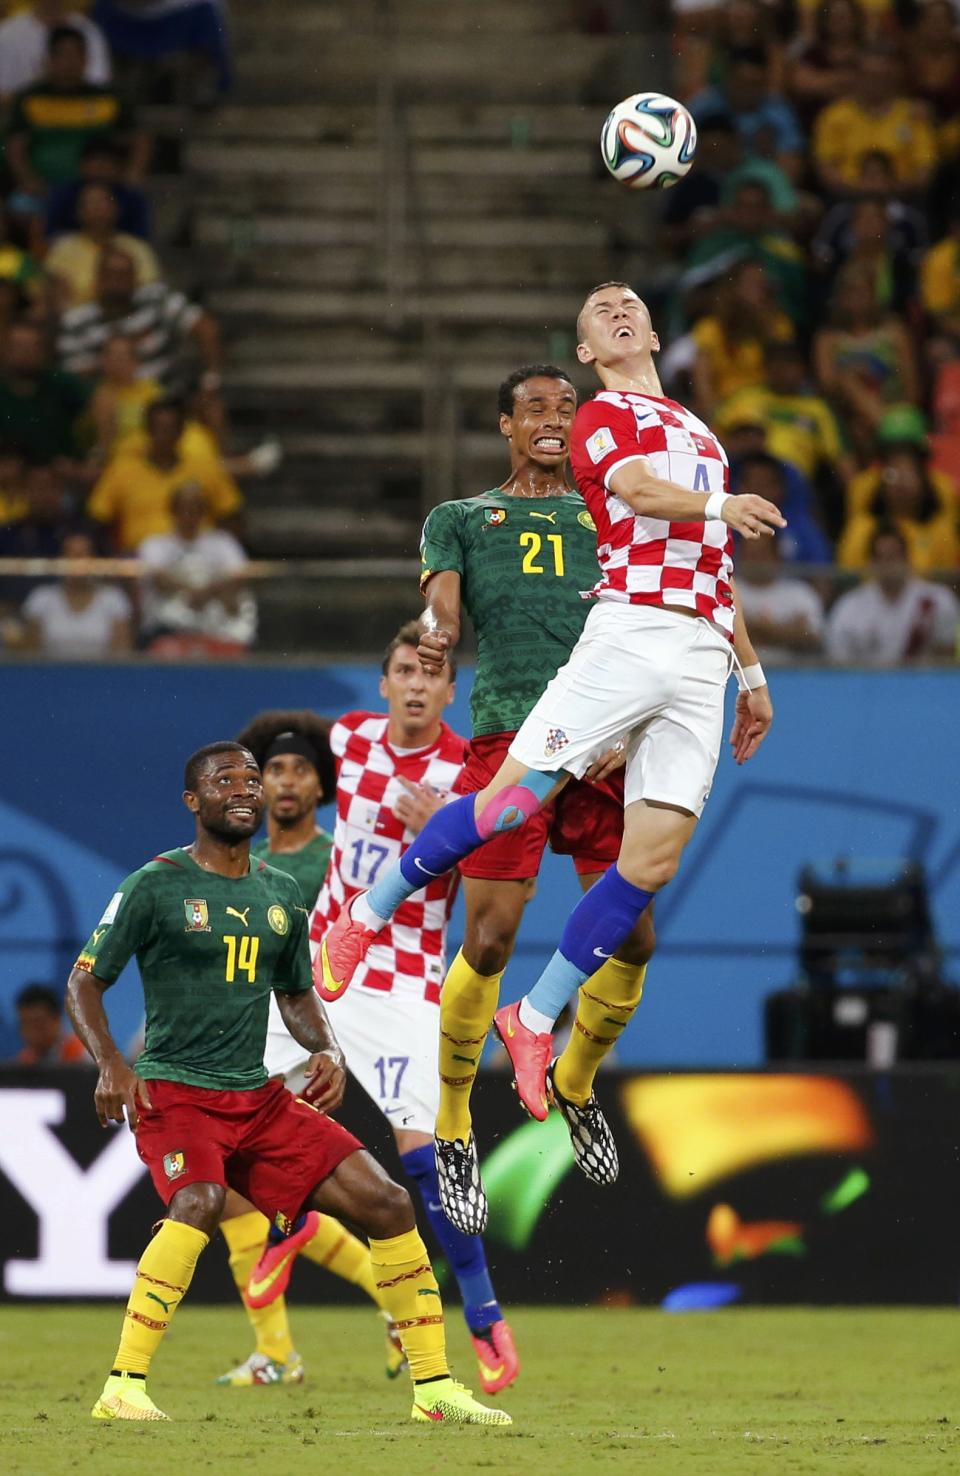 Croatia's Ivan Perisic (R) jumps for the ball with Cameroon's Joel Matip as Cameroon's Aurelien Chedjou (L) watches during their 2014 World Cup Group A soccer match at the Amazonia arena in Manaus June 18, 2014. REUTERS/Yves Herman (BRAZIL - Tags: SOCCER SPORT WORLD CUP TPX IMAGES OF THE DAY)